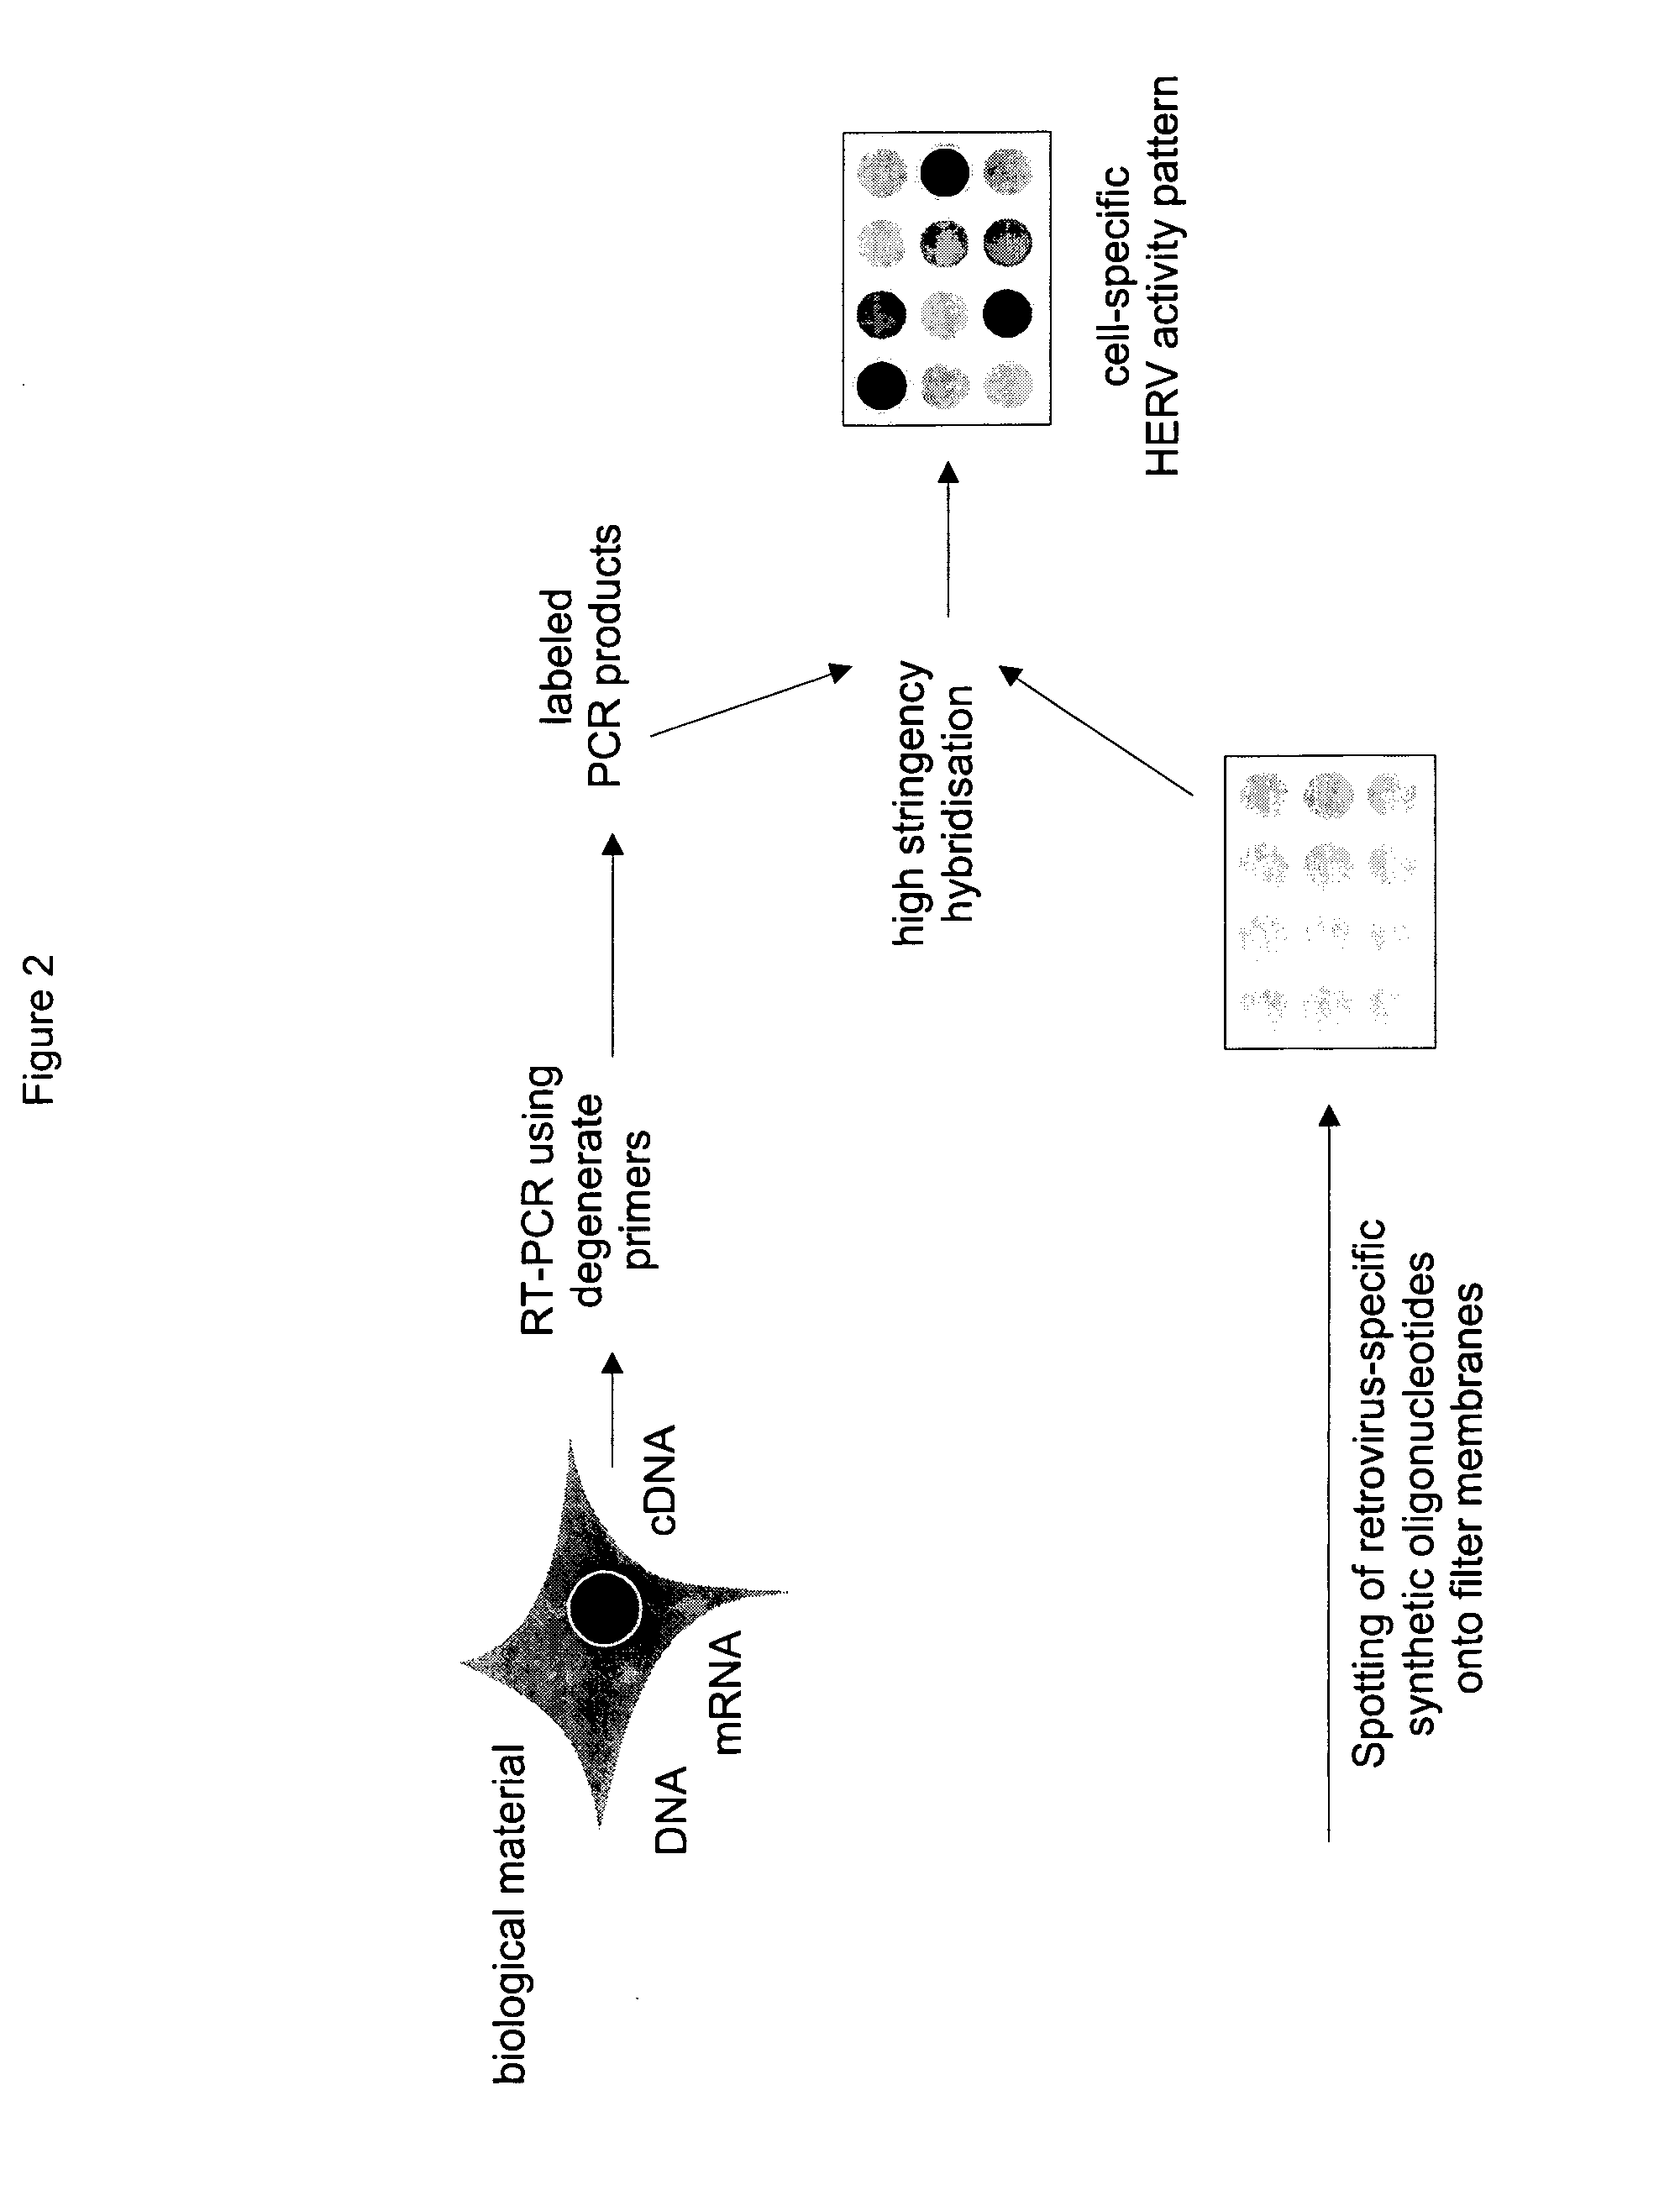 Method for the specific detection and identification of retroviral nucleic acids/retroviruses in a specimen